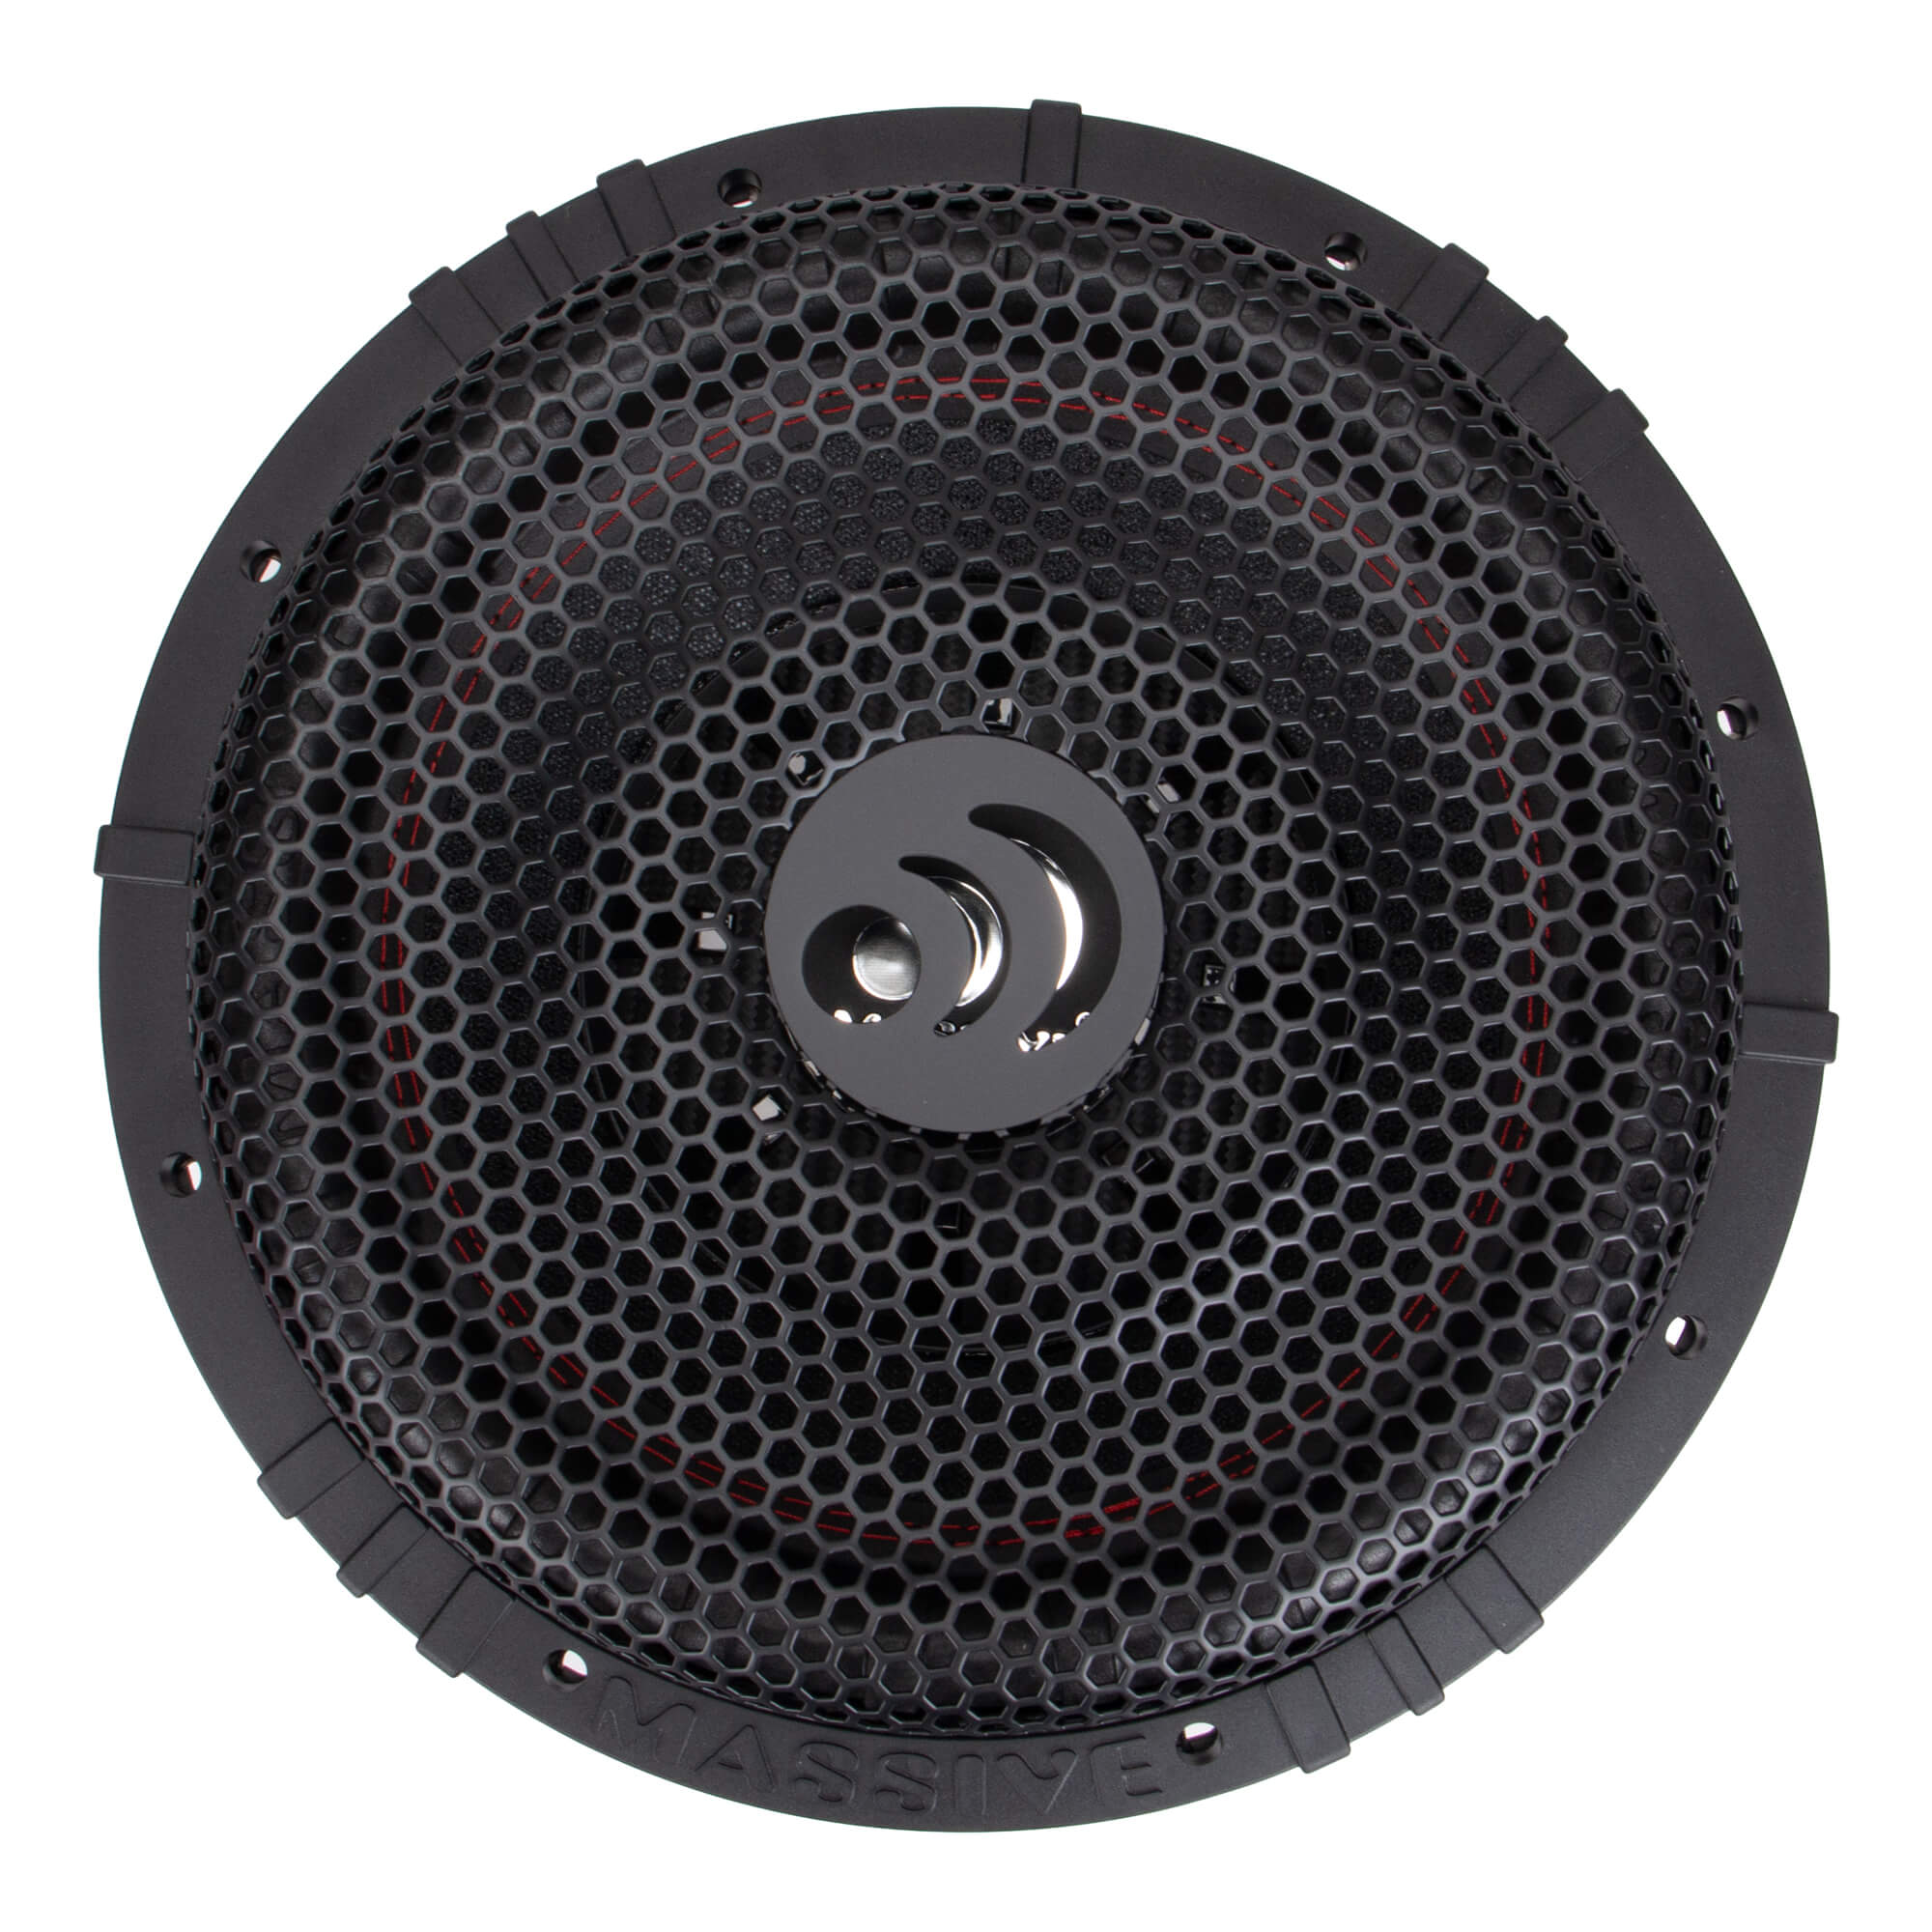 GTR124 - 12" 1000 Watts RMS Dual 4 Ohm Subwoofer